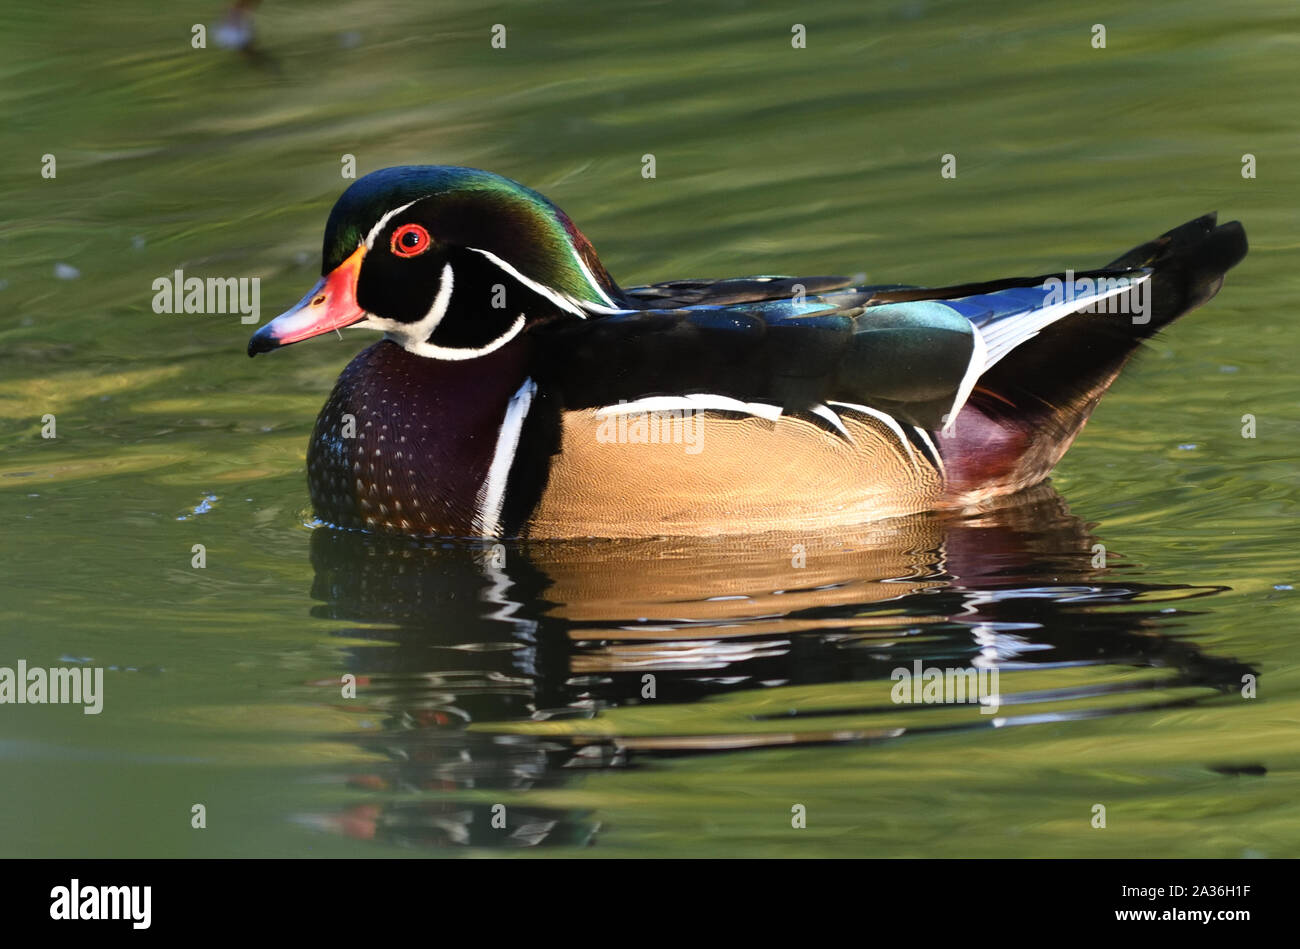 A male wood duck or Carolina duck (Aix sponsa) on a wooded pool in Stanley Park. Lost Lagoon, Stanley Park, Vancouver, British Columbia, Canada. Stock Photo